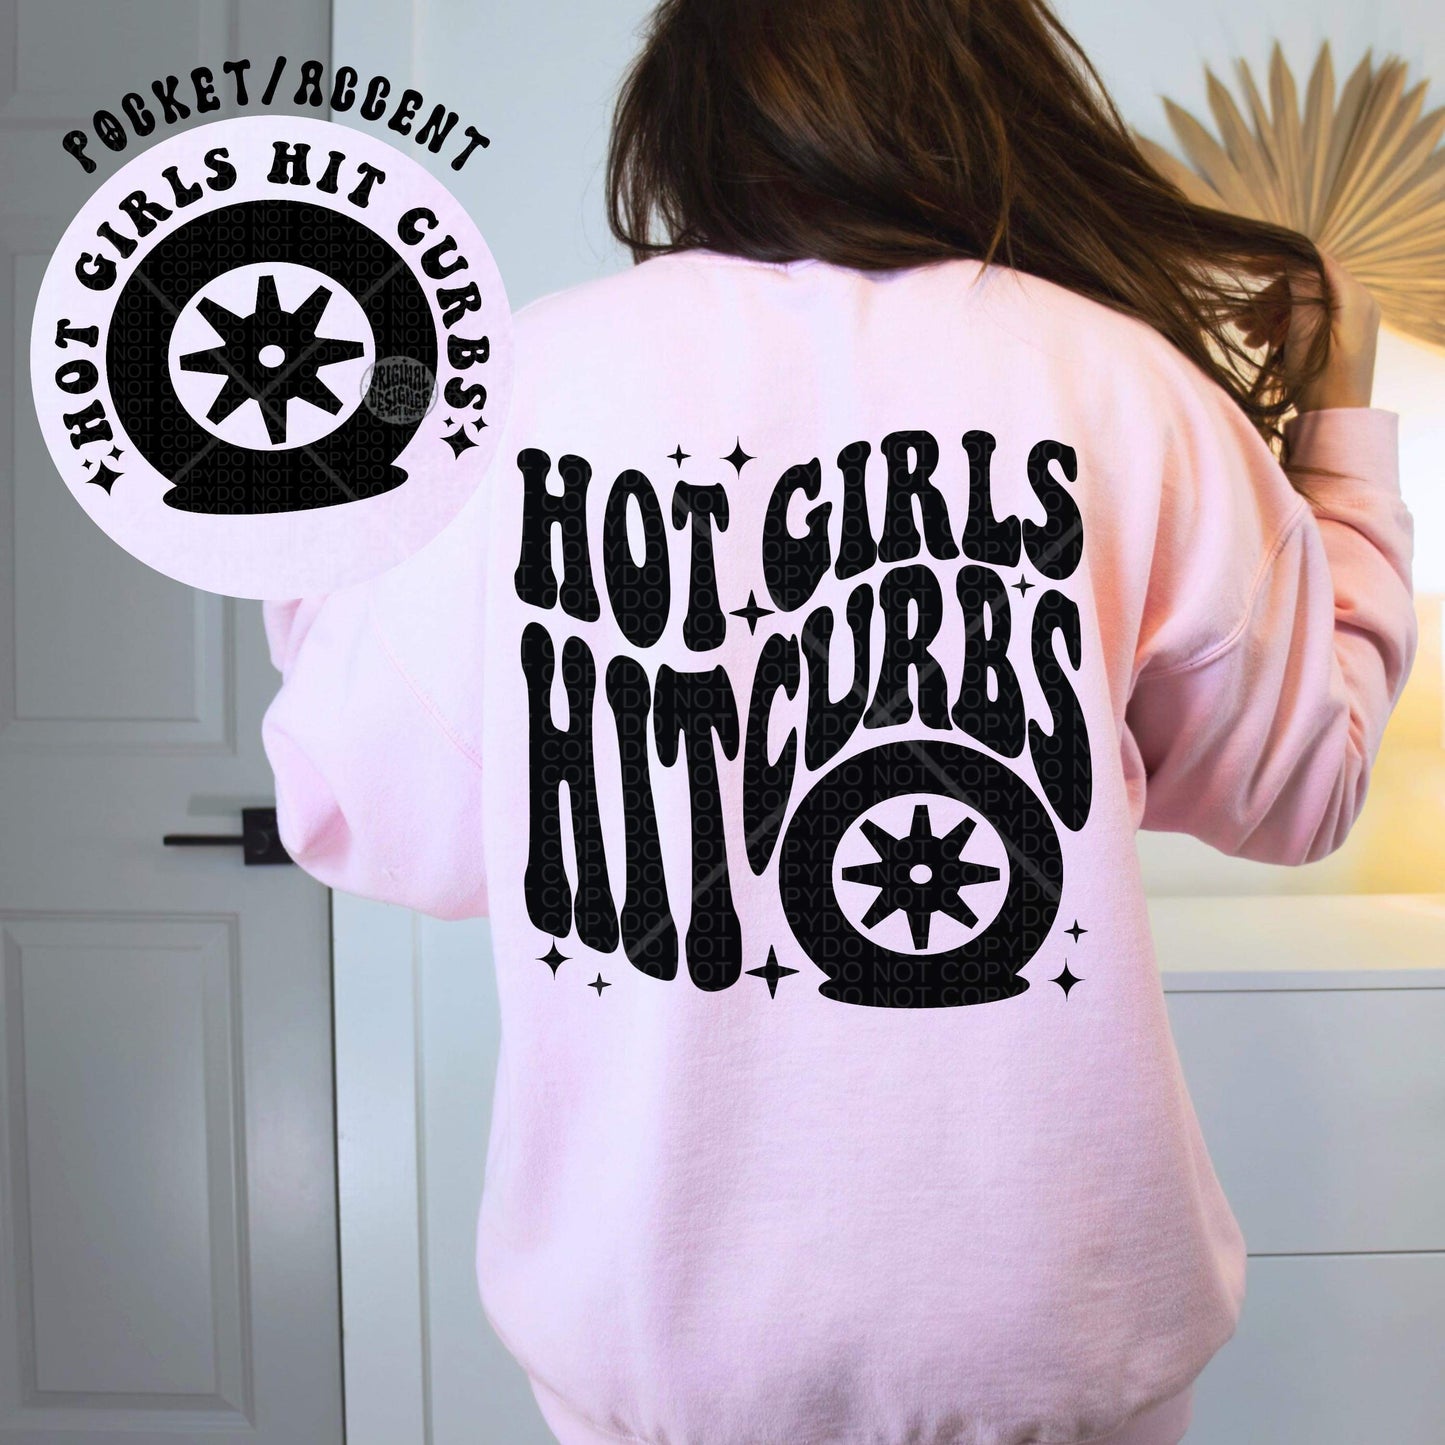 Hot girls hit curbs- Front & back Exclusive Shirt